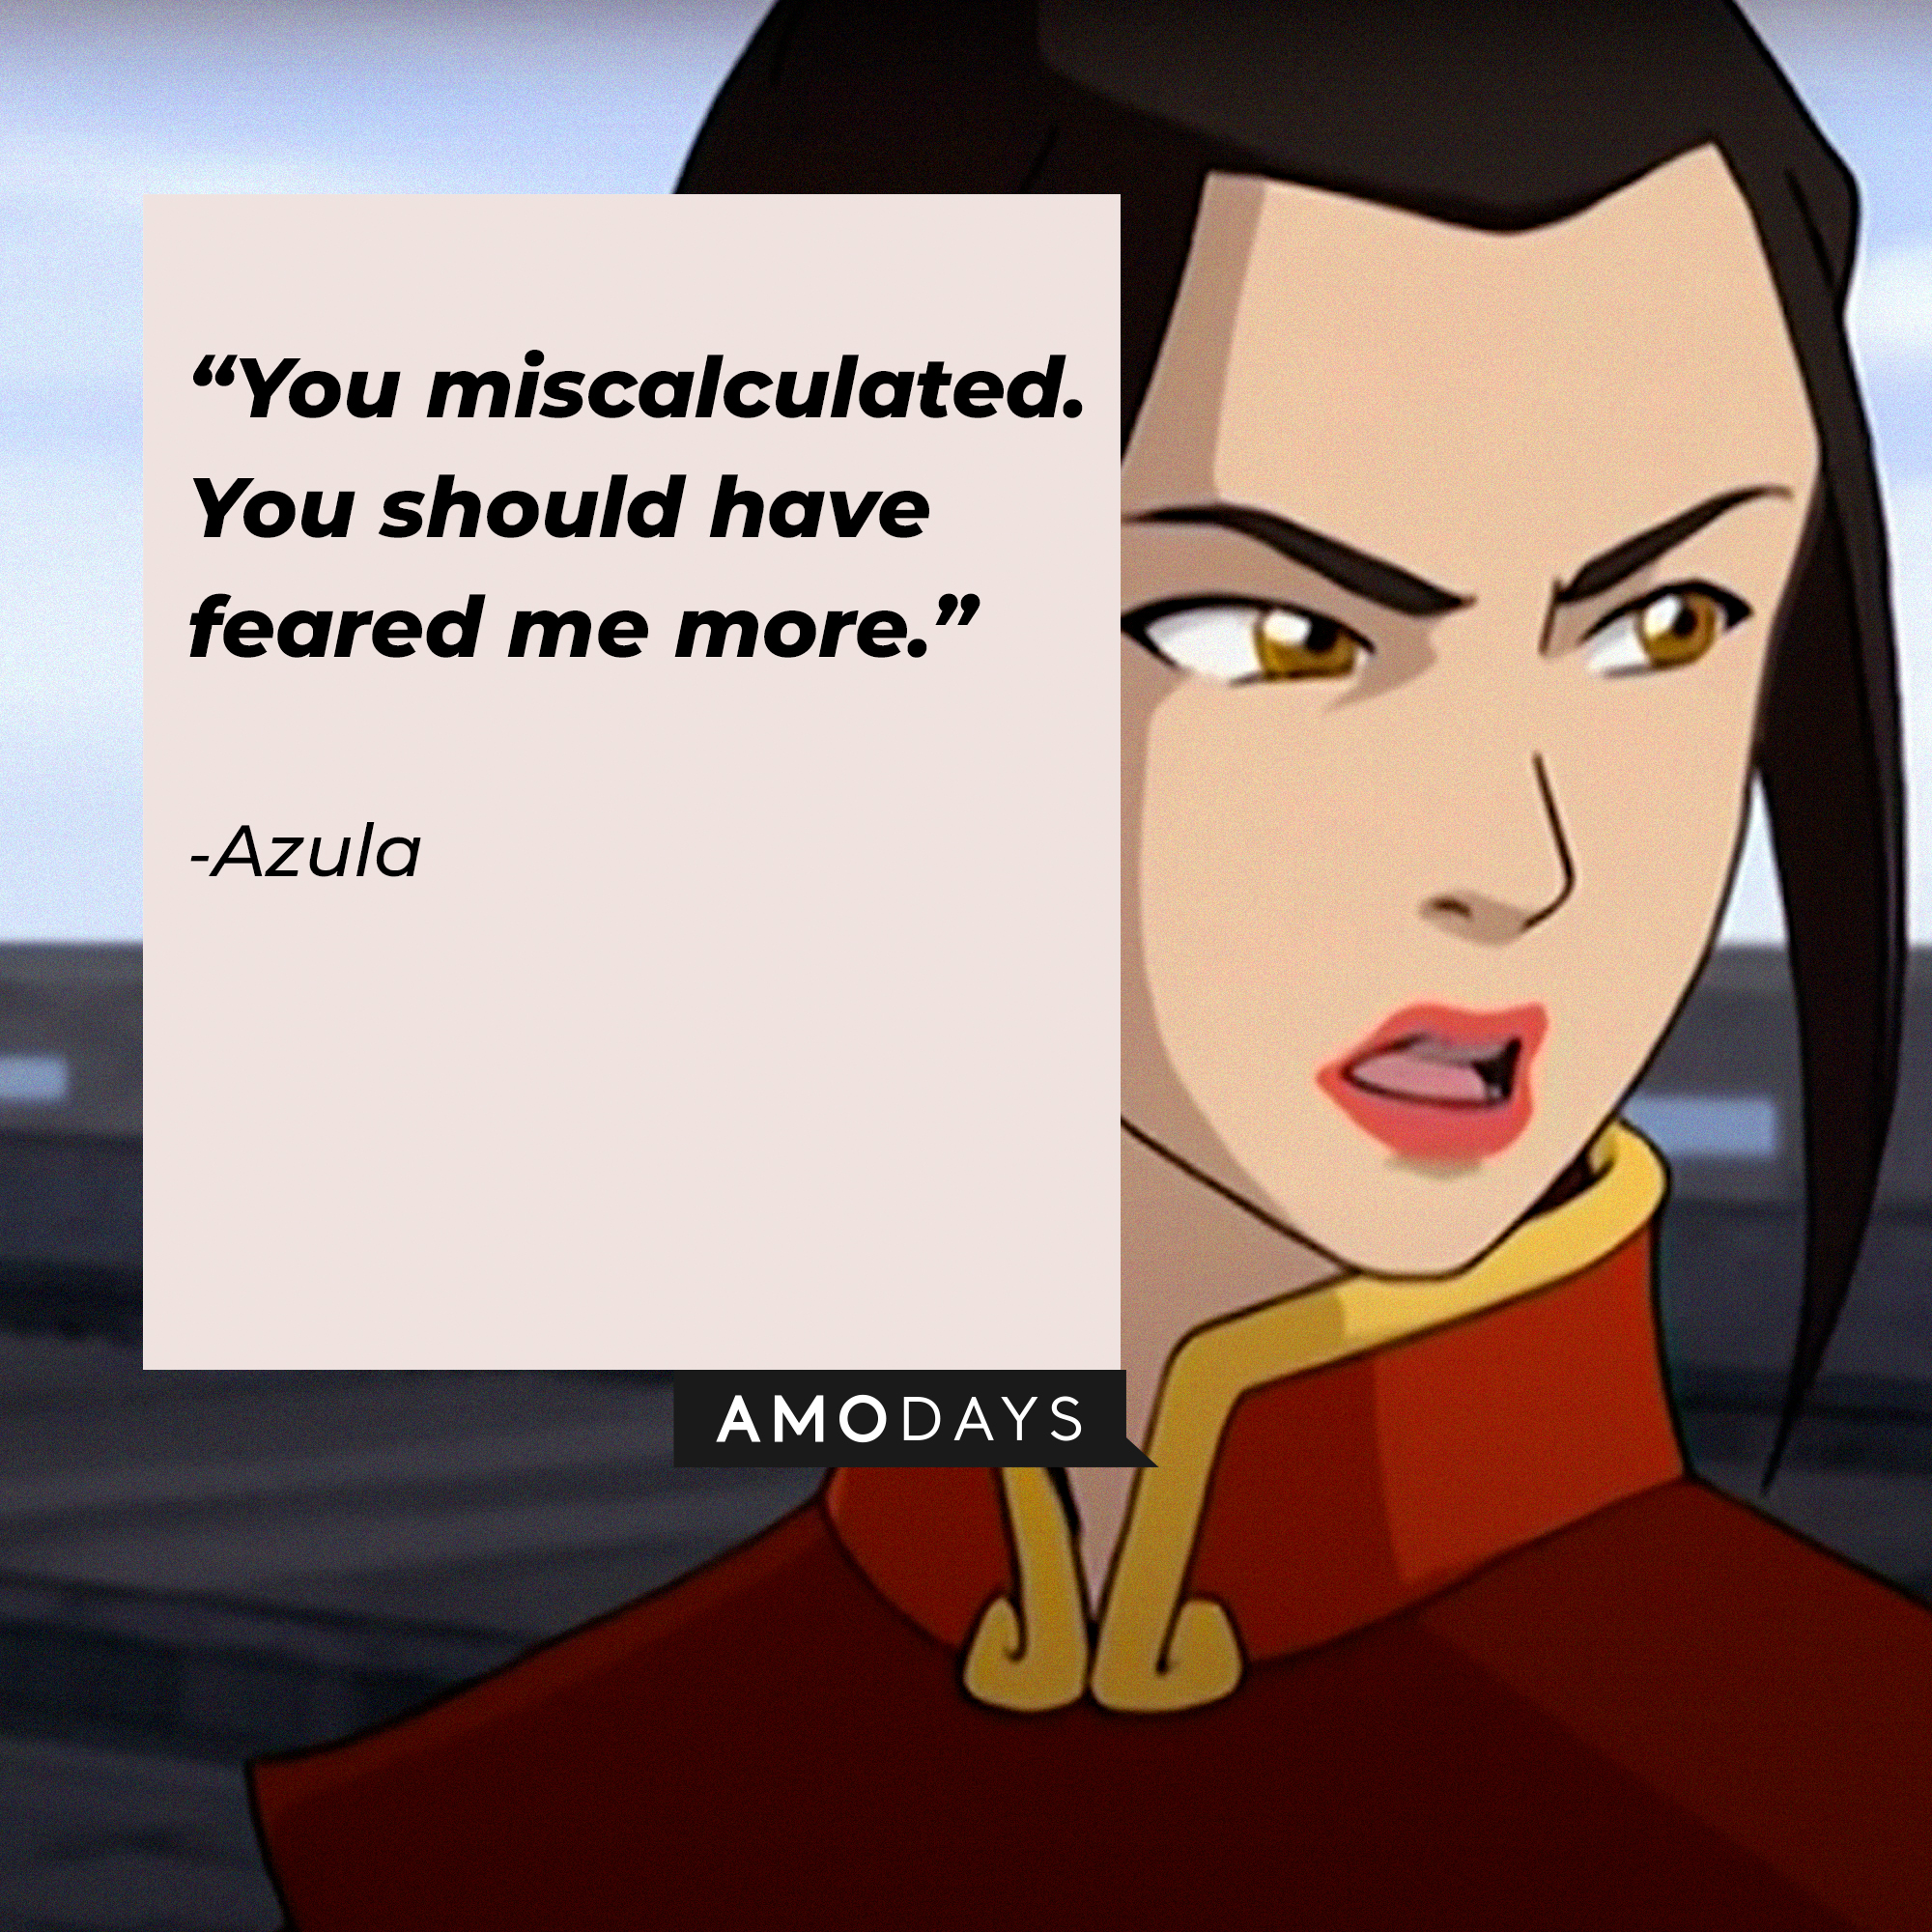 Azula's quote: “You miscalculated. You should have feared me more.” | Source: youtube.com/TeamAvatar